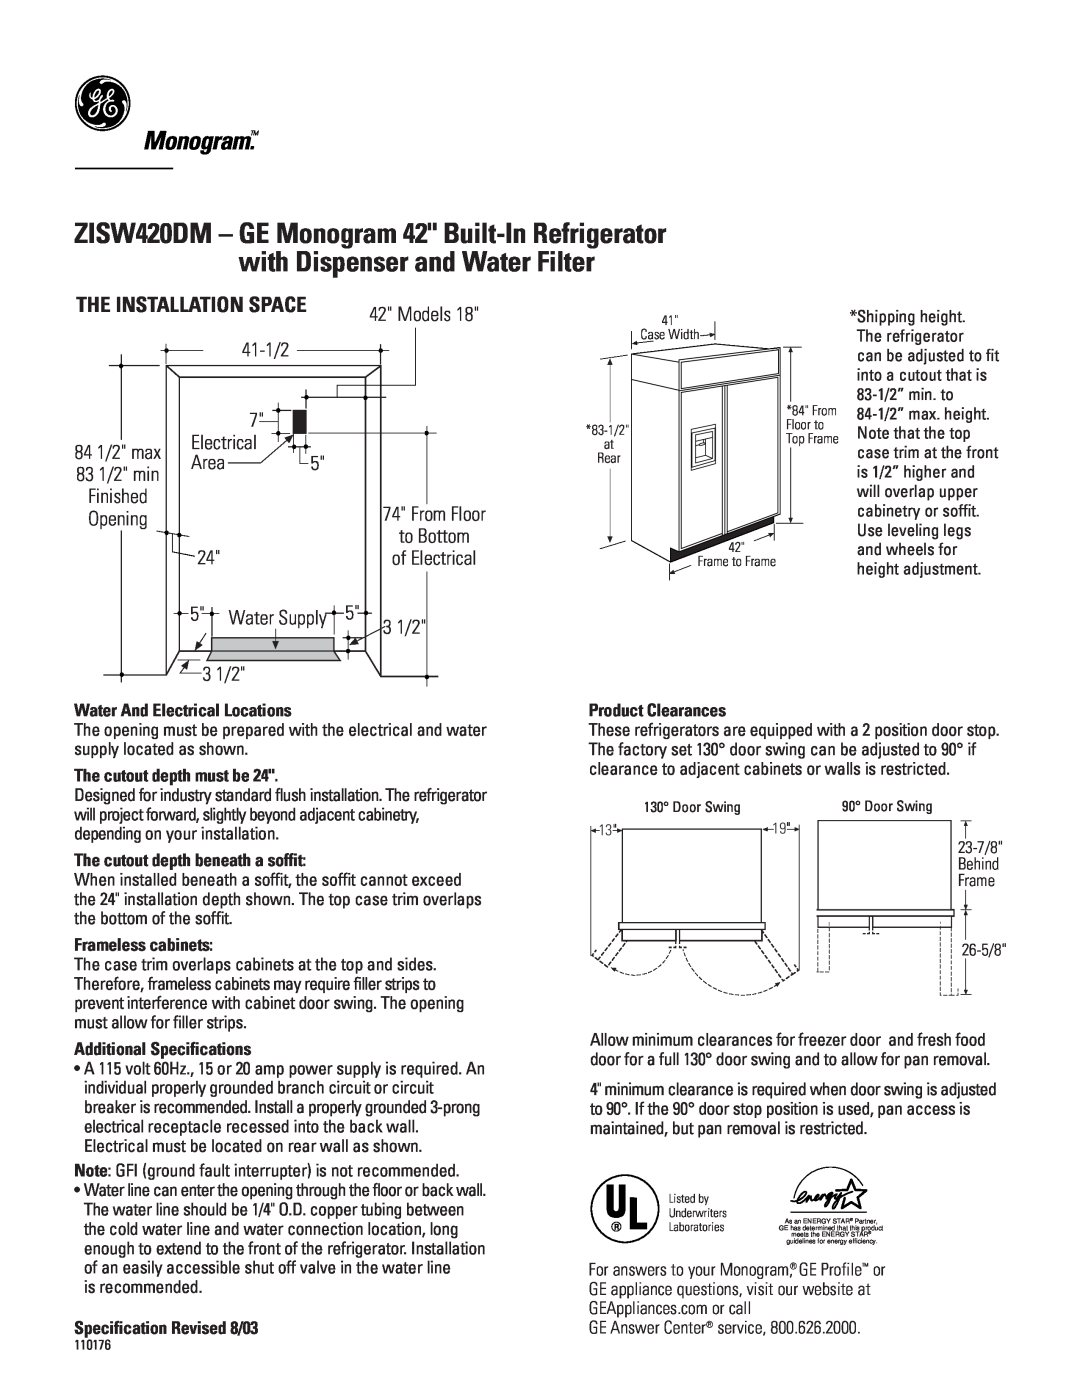 GE ZISW420DM specifications Monogram, The Installation Space, Water And Electrical Locations, The cutout depth must be 